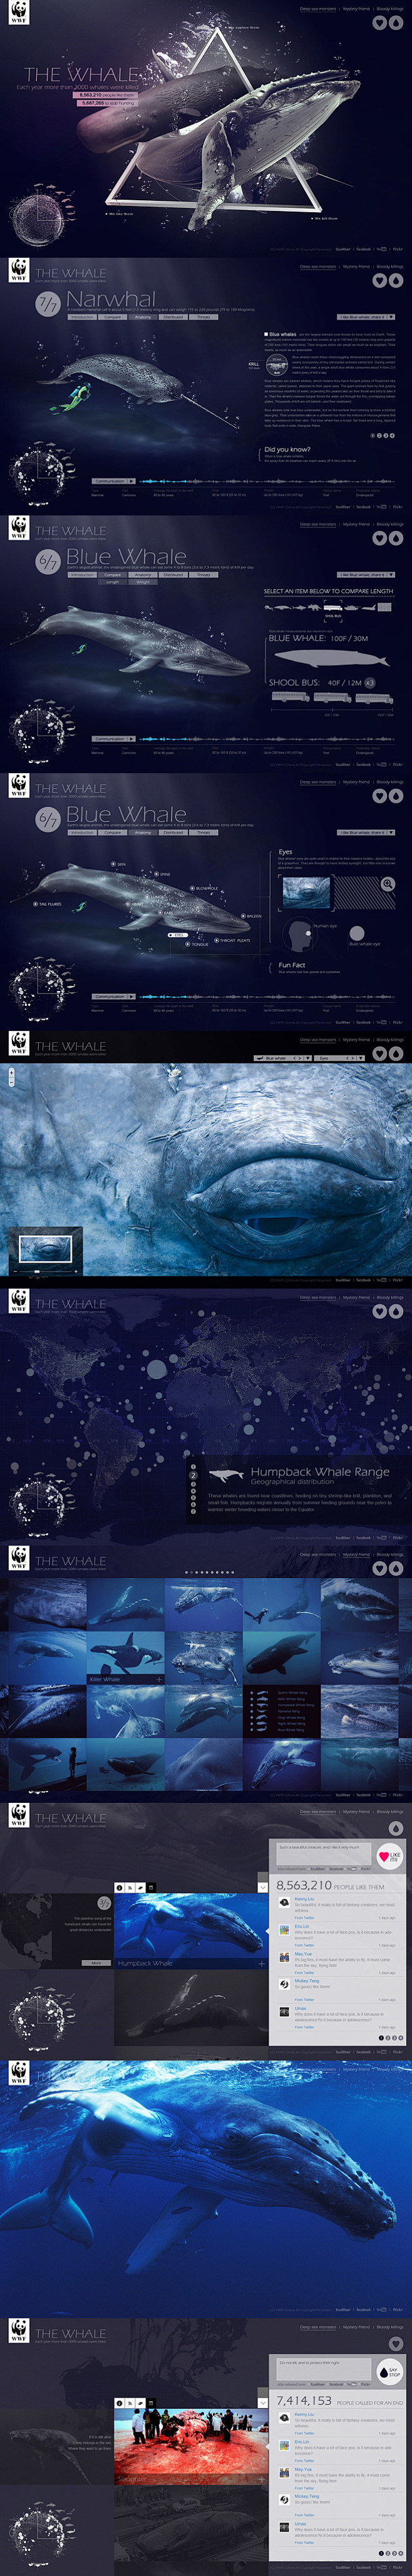 WWF_The-Whale